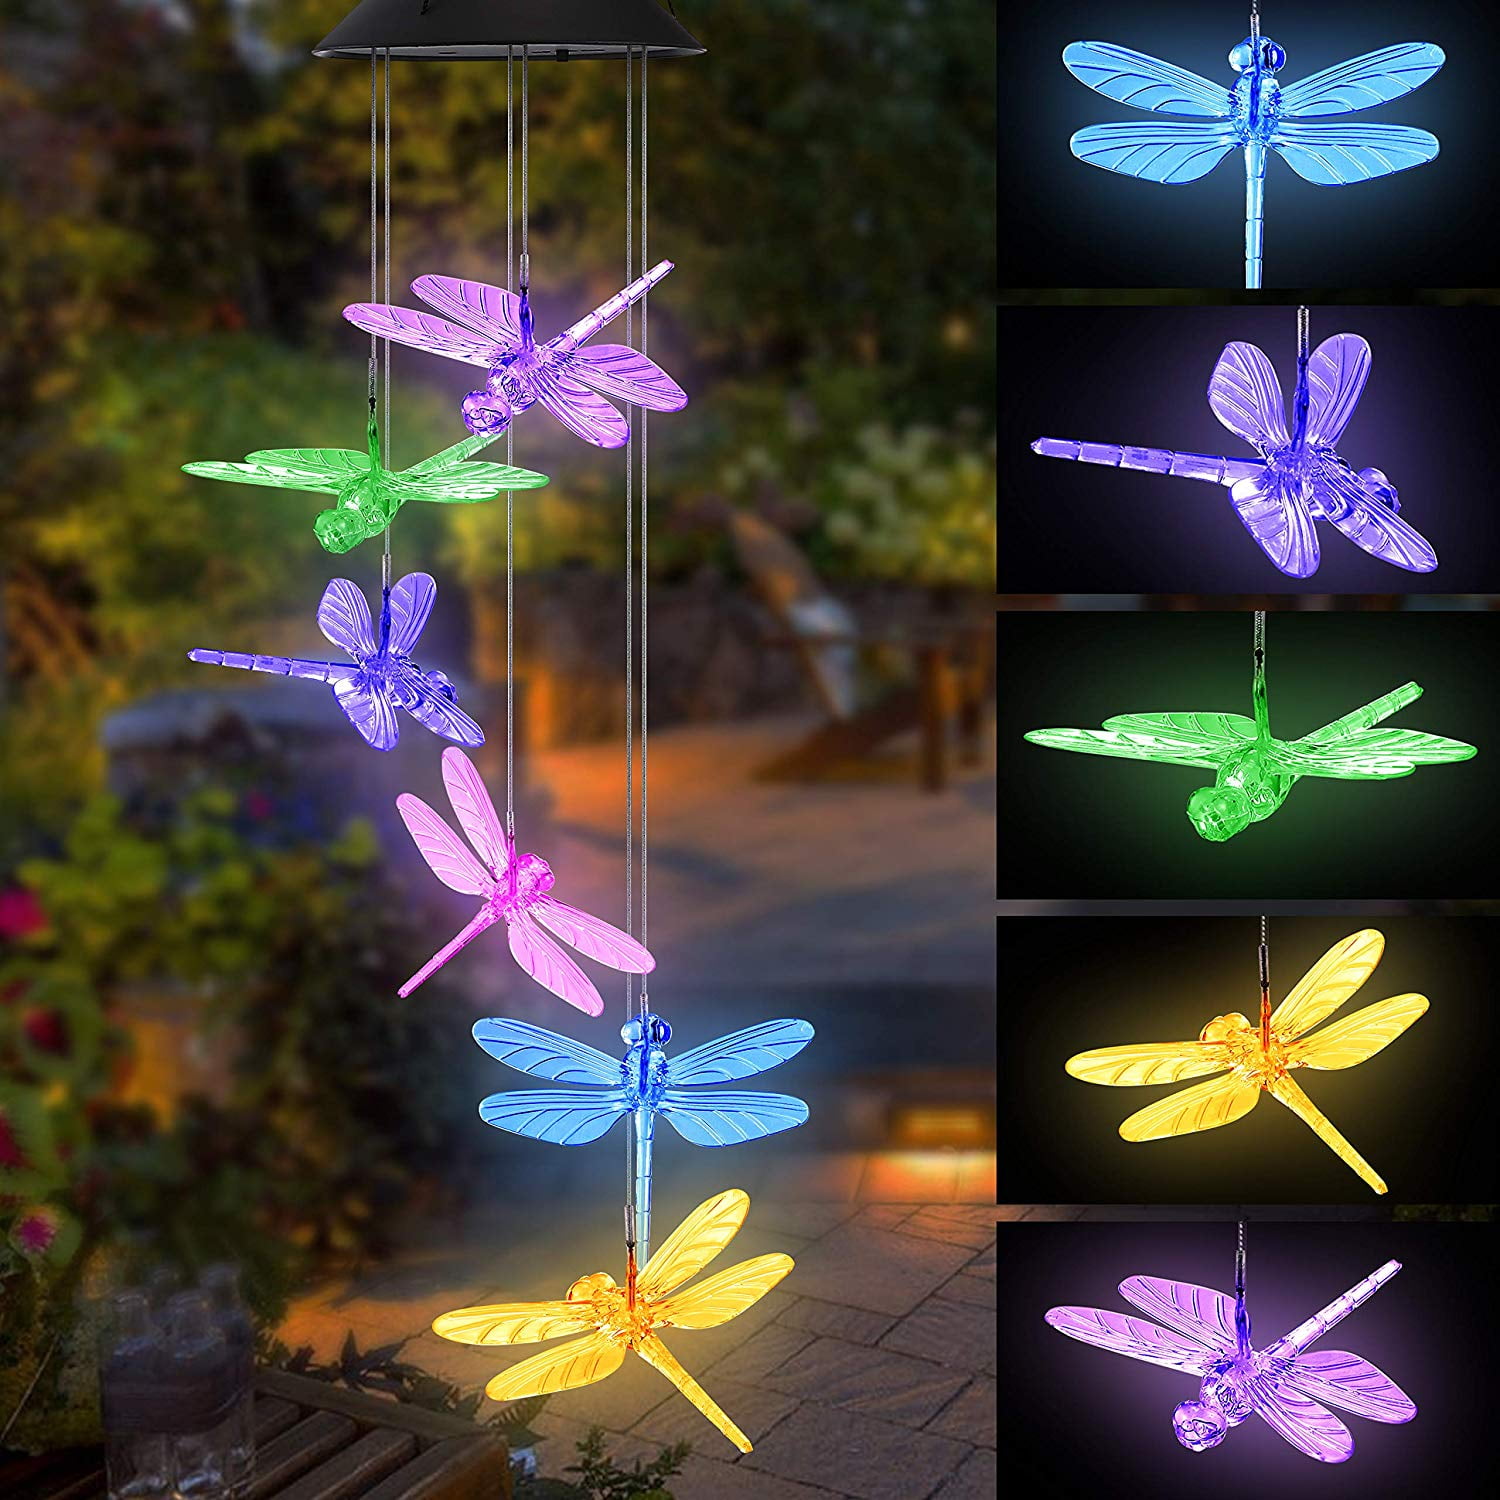 Solar Color-Changing Wind Chime Lights for Outdoor Indoor Home Garden Yard Patio Party Festival Decor Six LED Crystal Balls Hanging Lamp Portable Waterproof Romantic Wind Bell Light